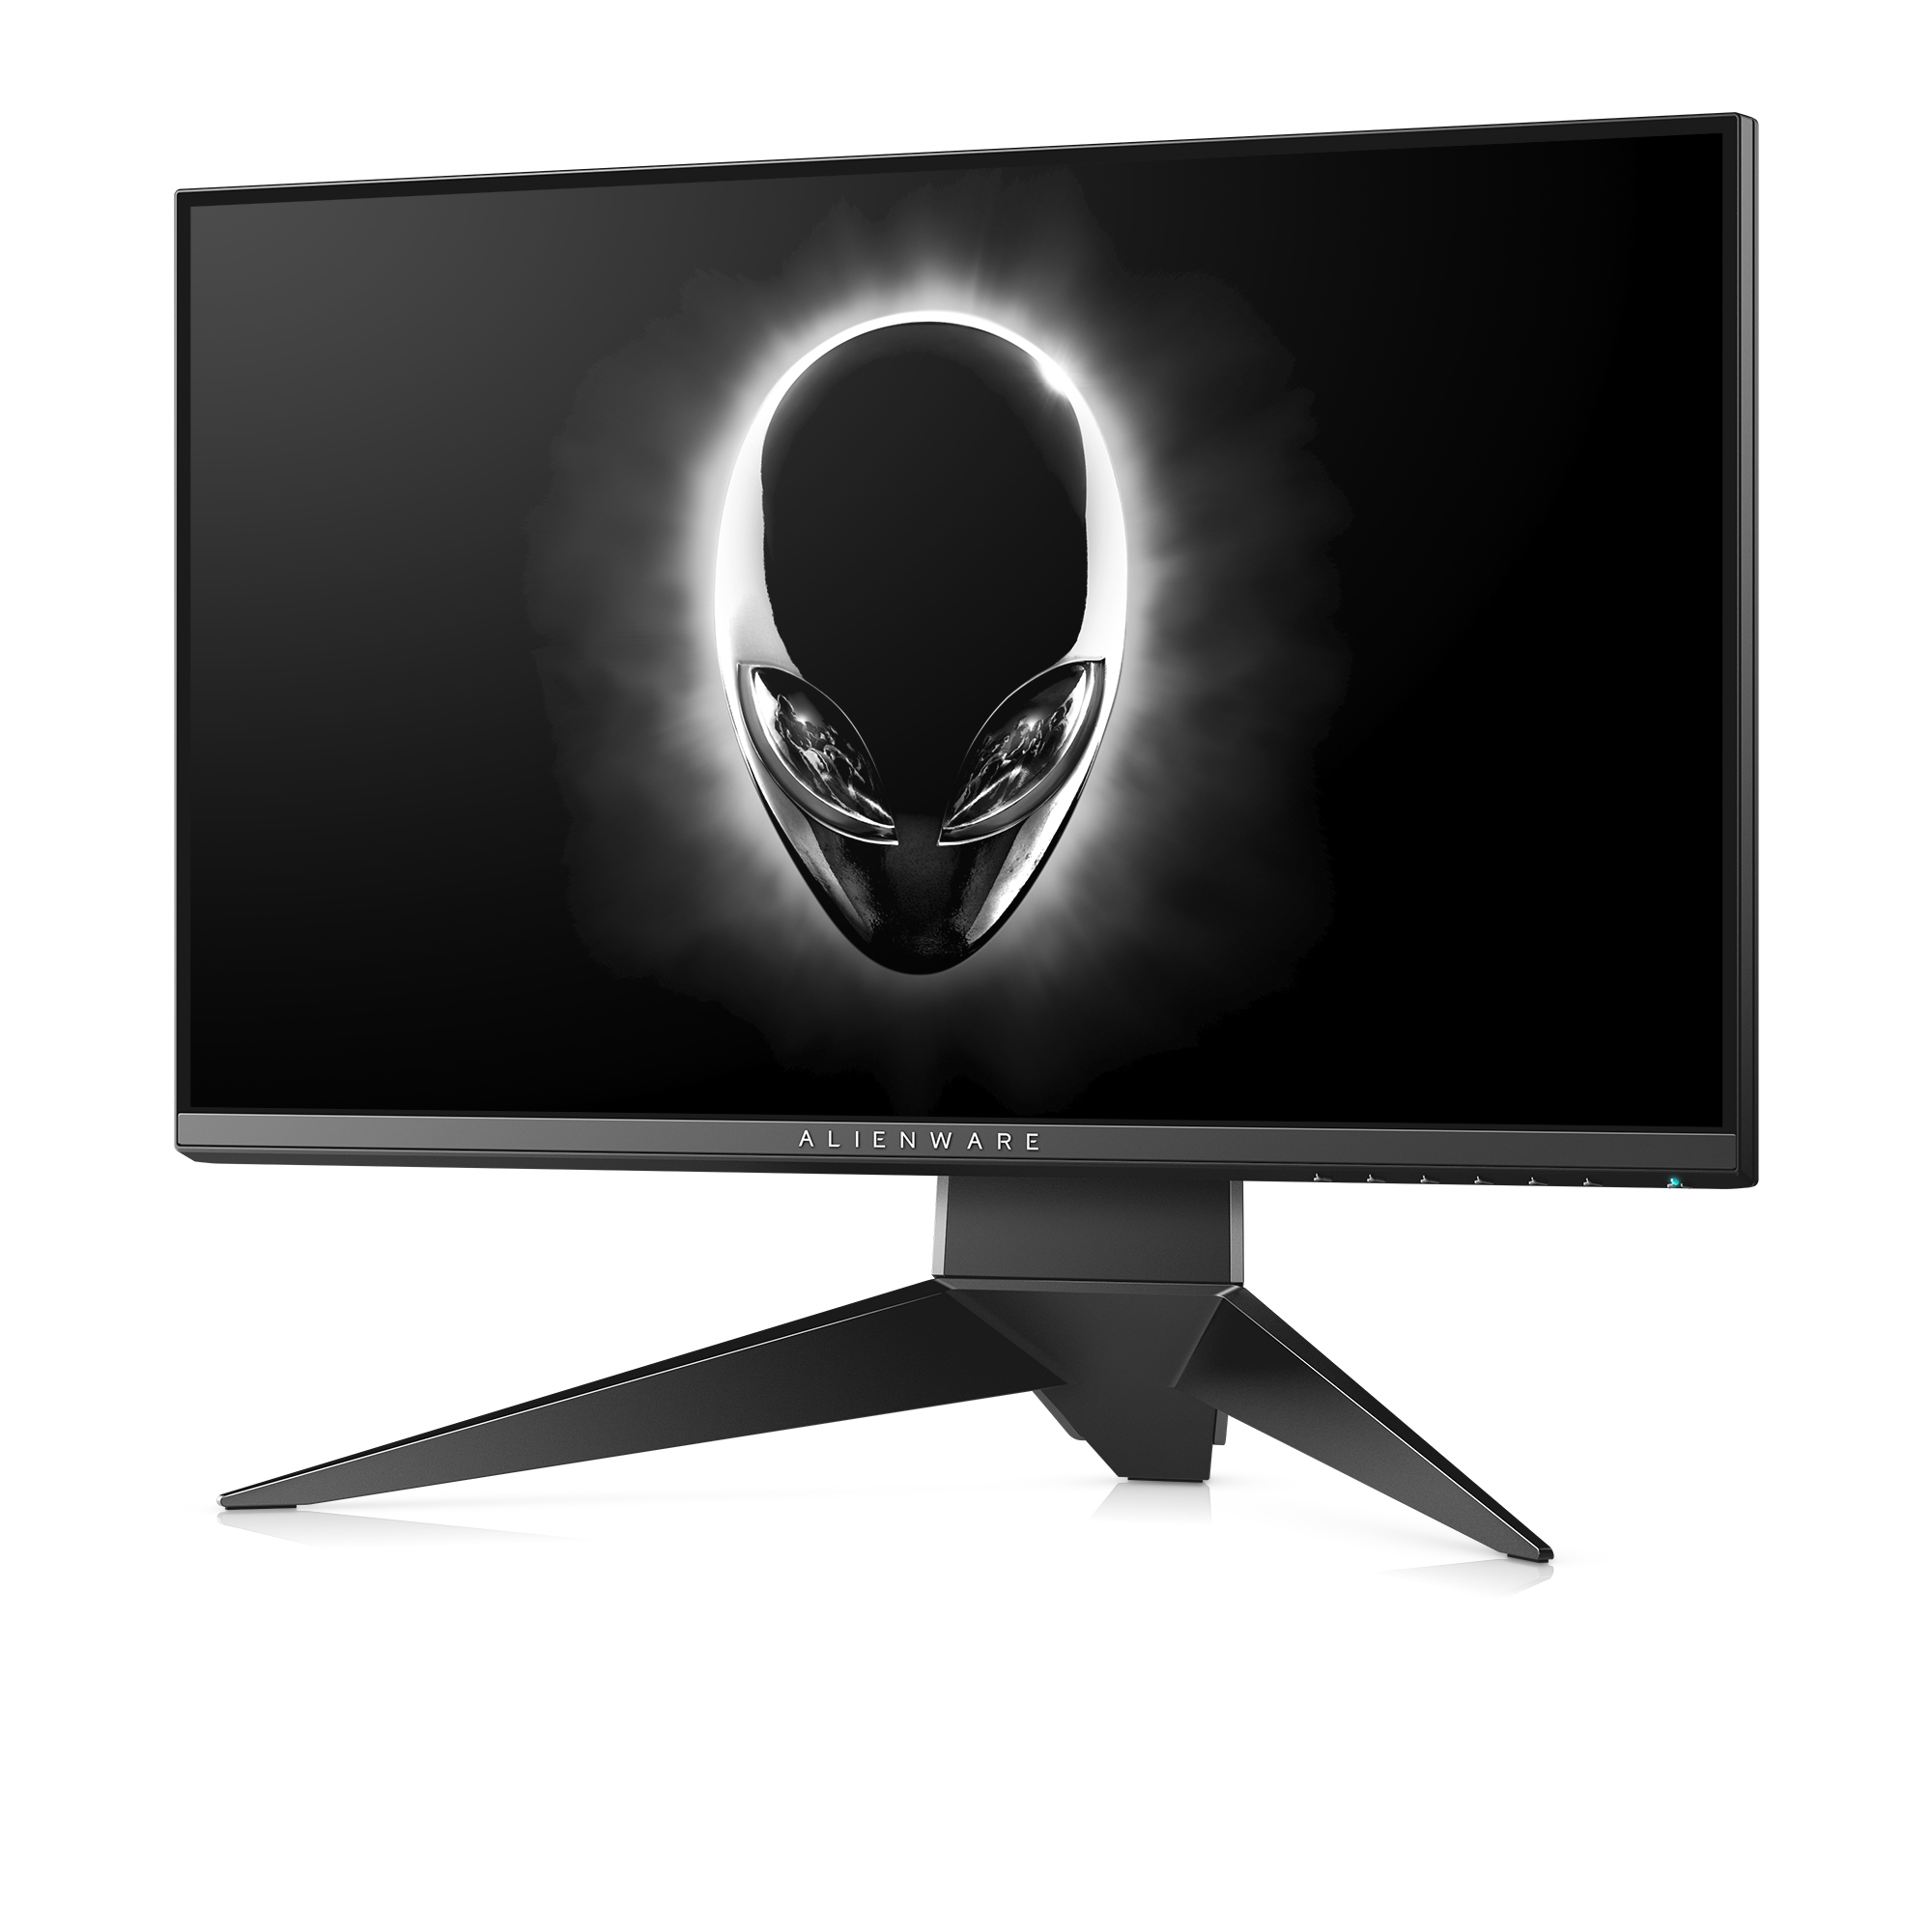 Alienware 25" 1920x1080 HDMI DP USB 3.0 240hz 1ms NVIDIA G-SYNC HD LCD Gaming monitor - AW2518H - image 4 of 11